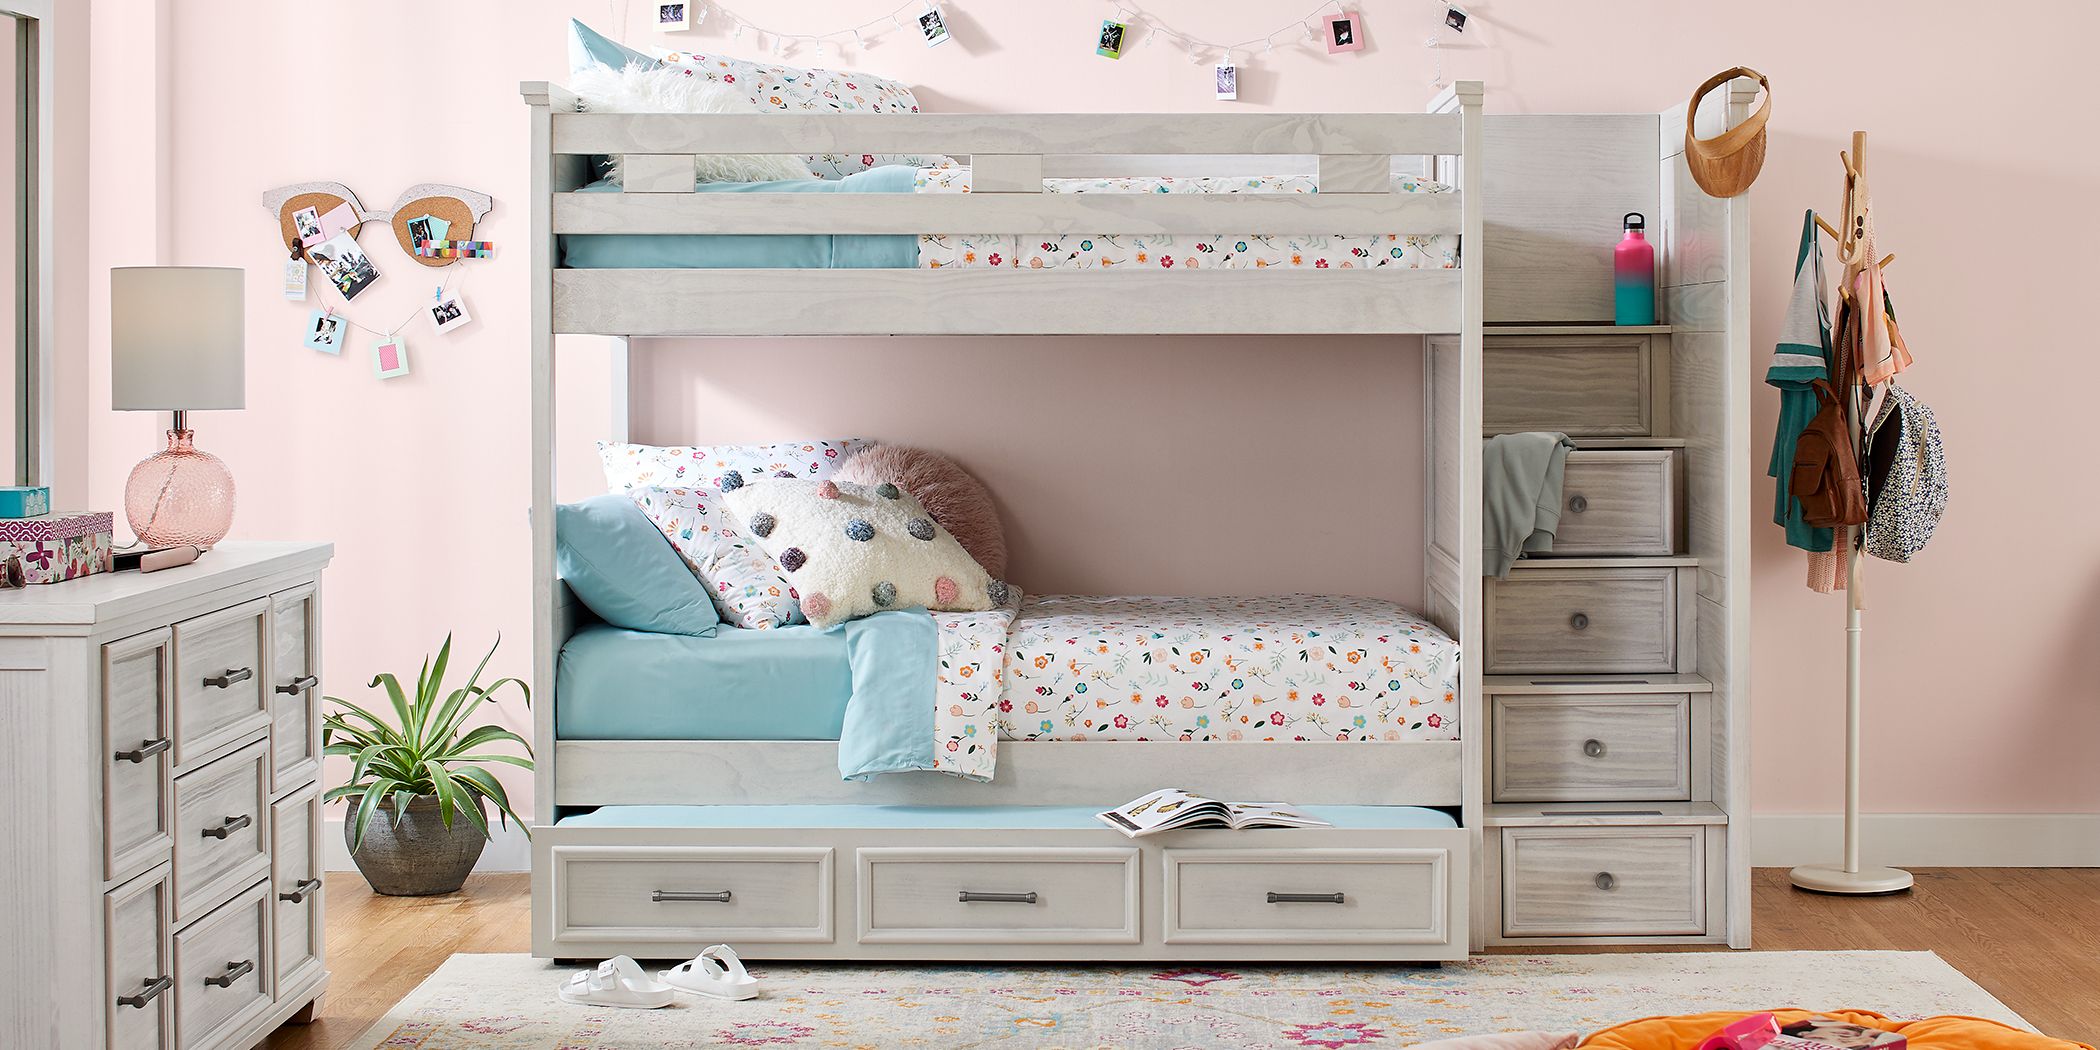 Bunk Beds With Storage Space, Boys Bunk Beds With Storage